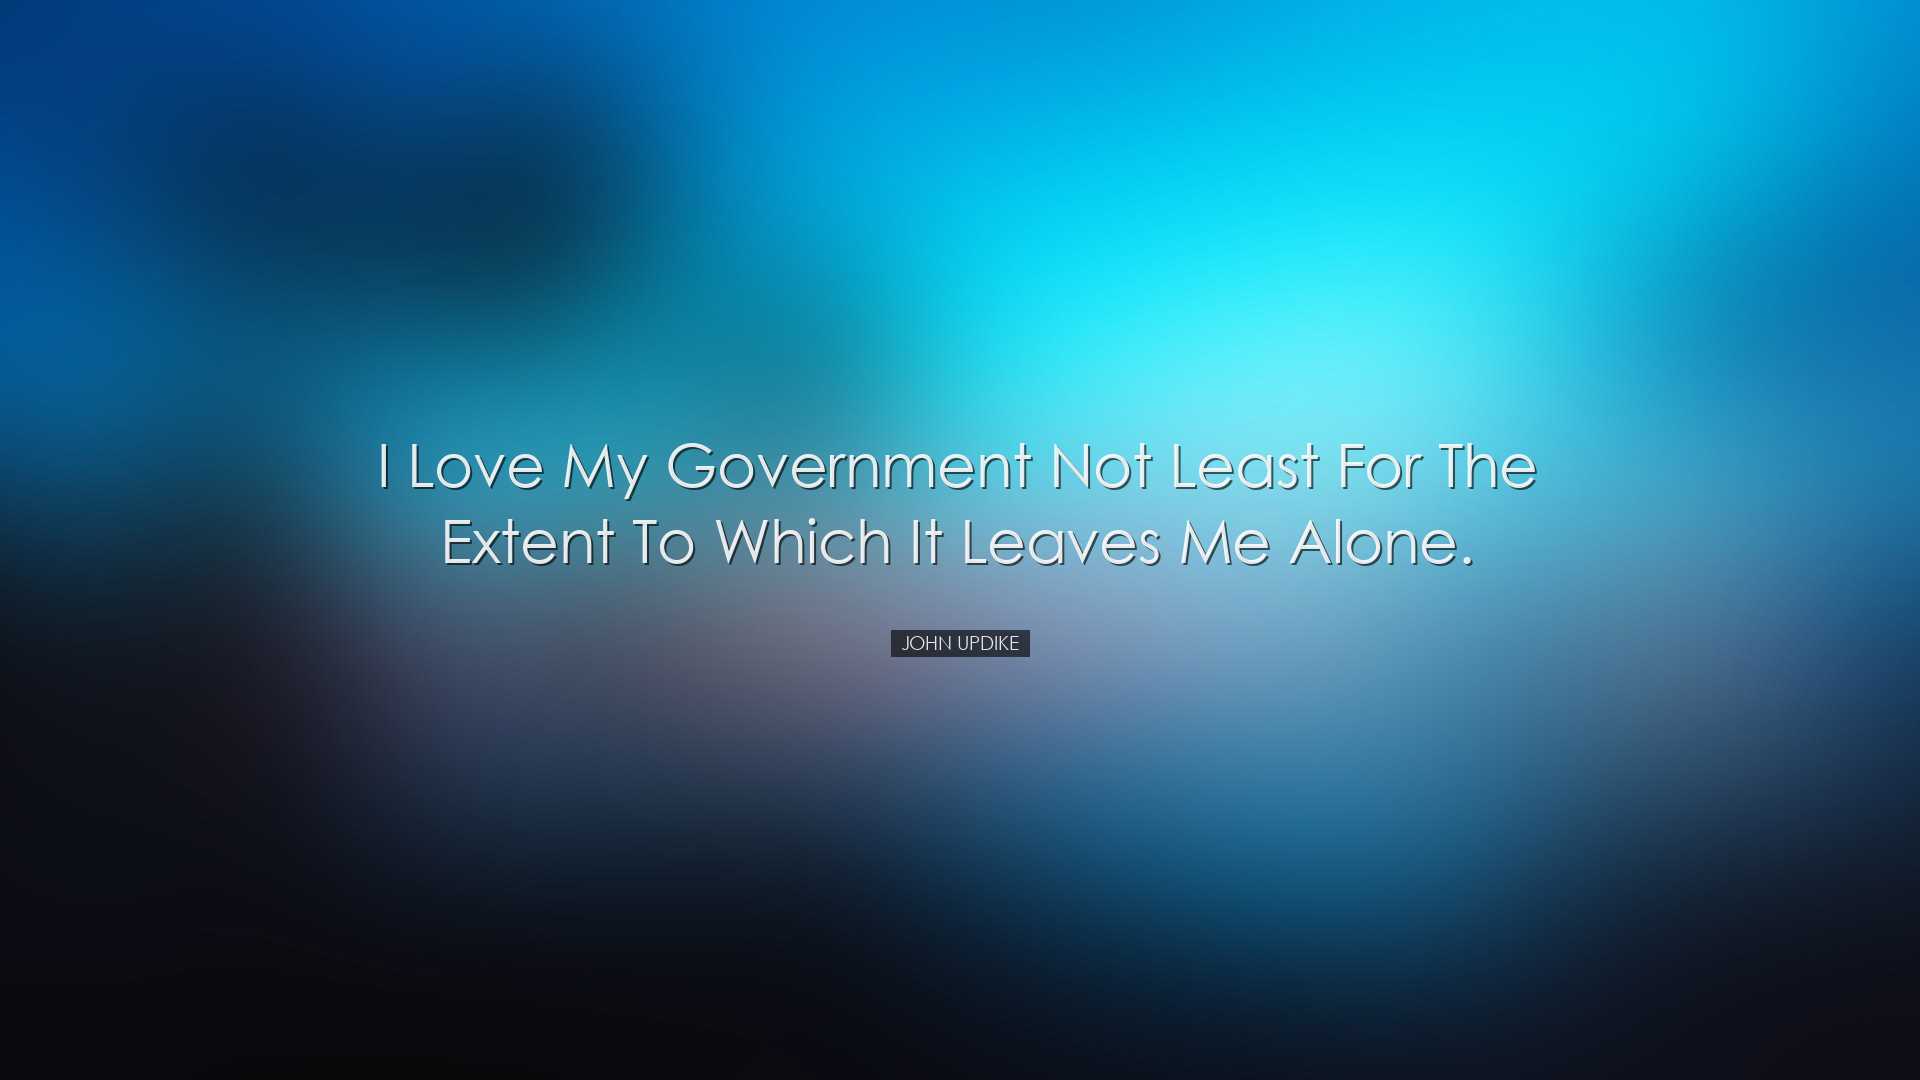 I love my government not least for the extent to which it leaves m